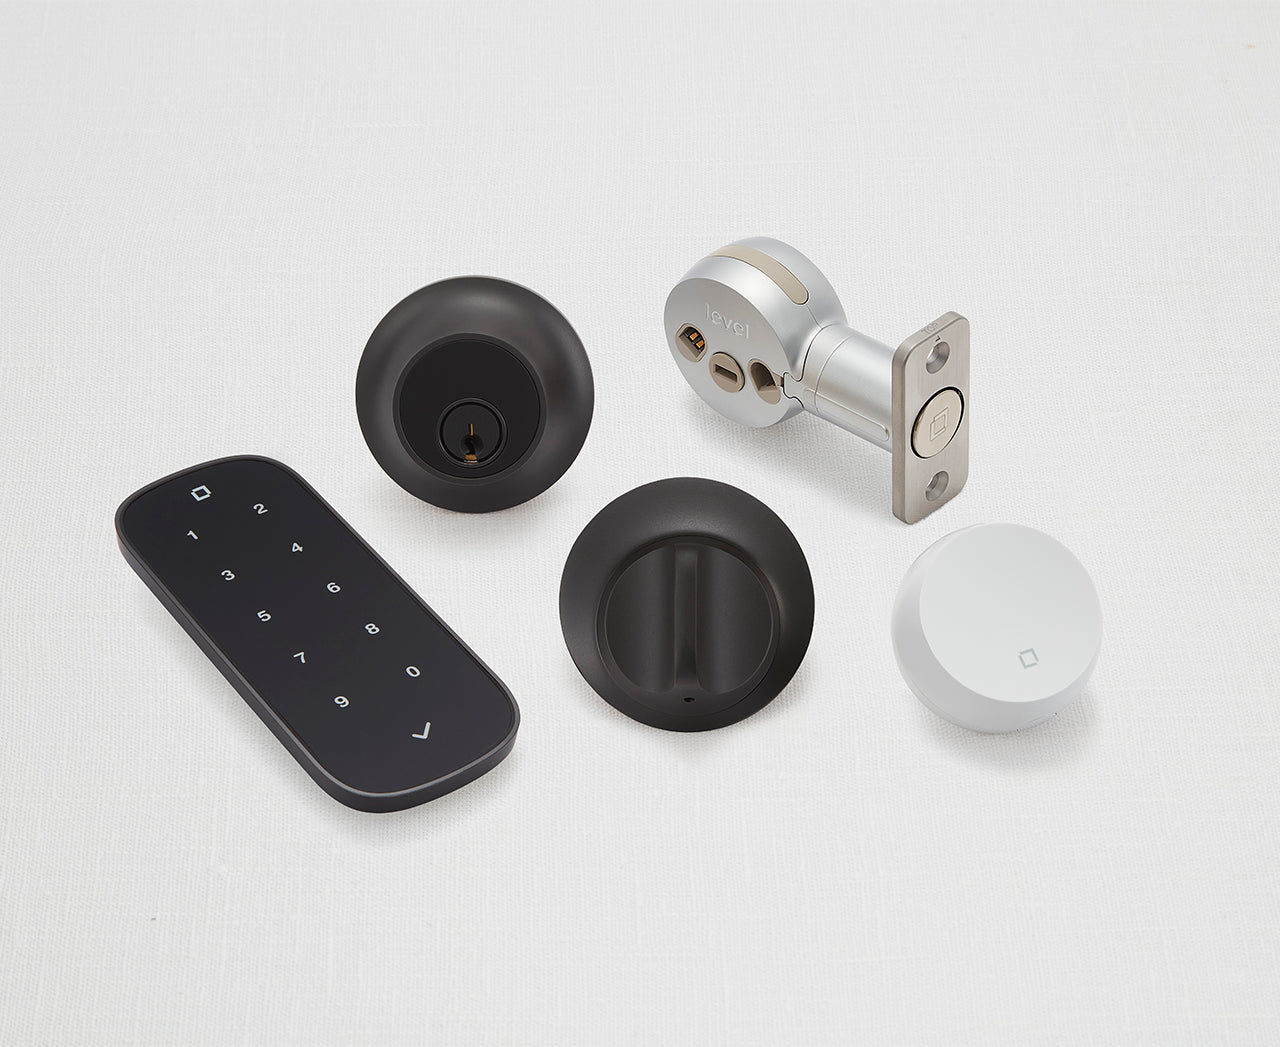 Exclusive: August Smart Lock Flaw Opens Your Wi-Fi Network to